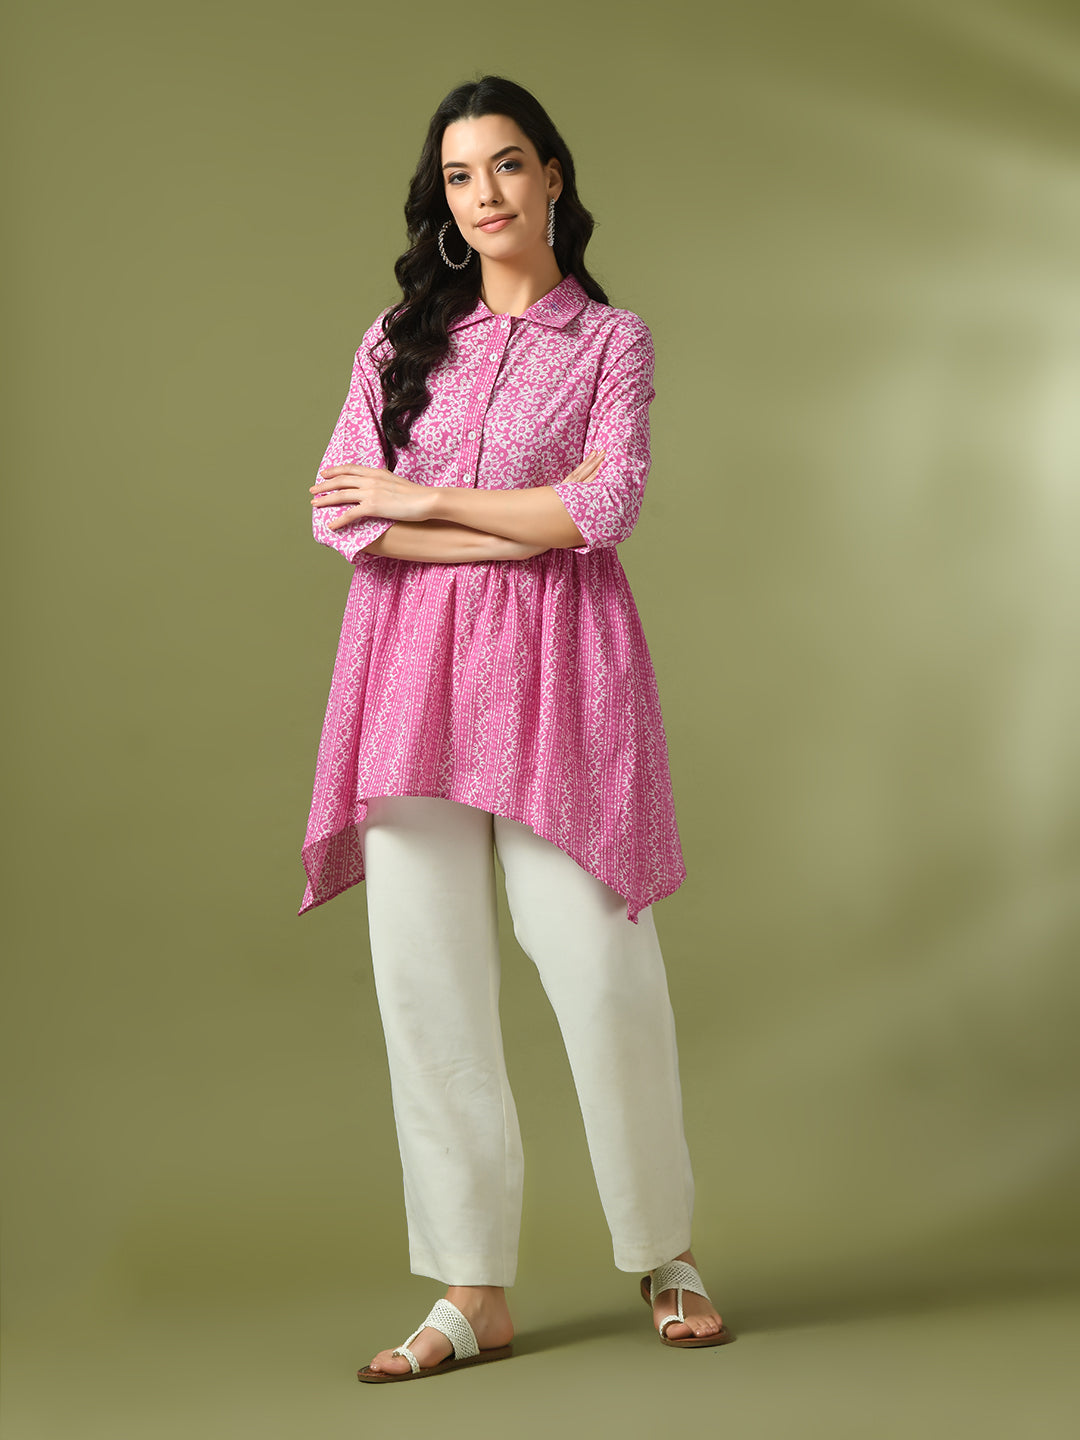 Women's  Pink Embellished Cotton Gathered Party Empire Top  - Myshka